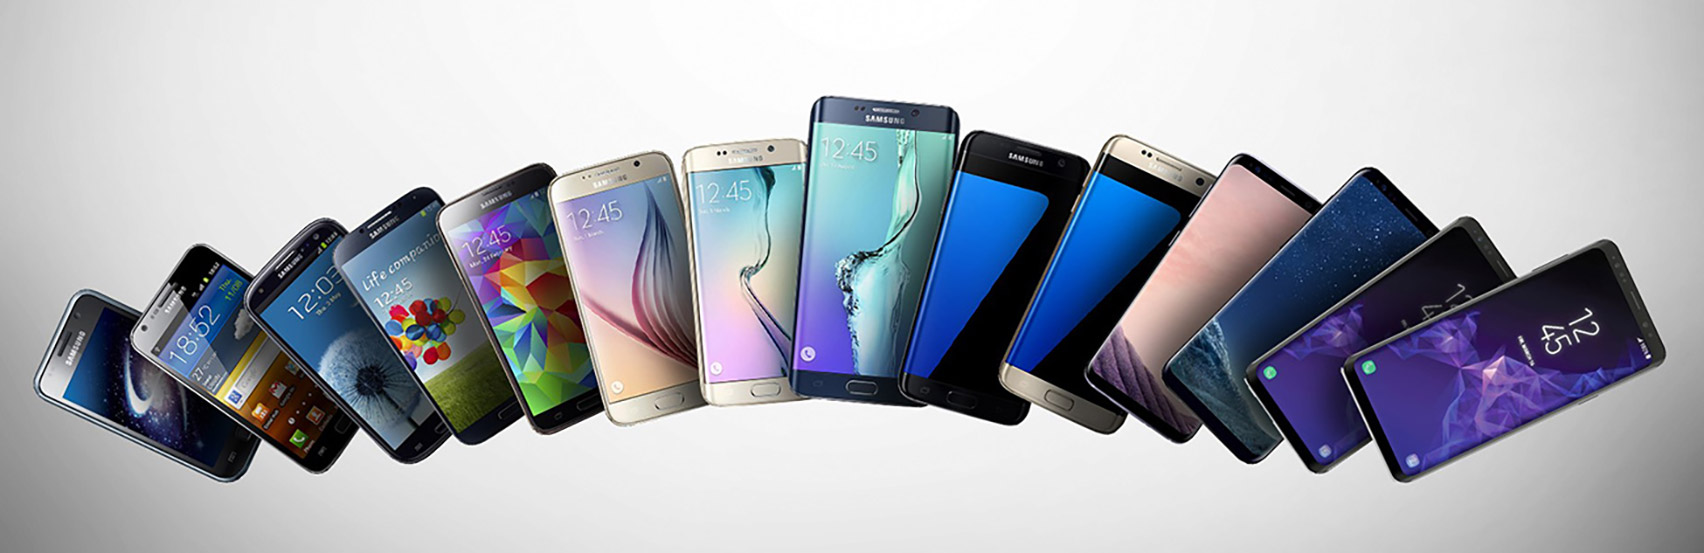 Samsung Galaxy mobile devices